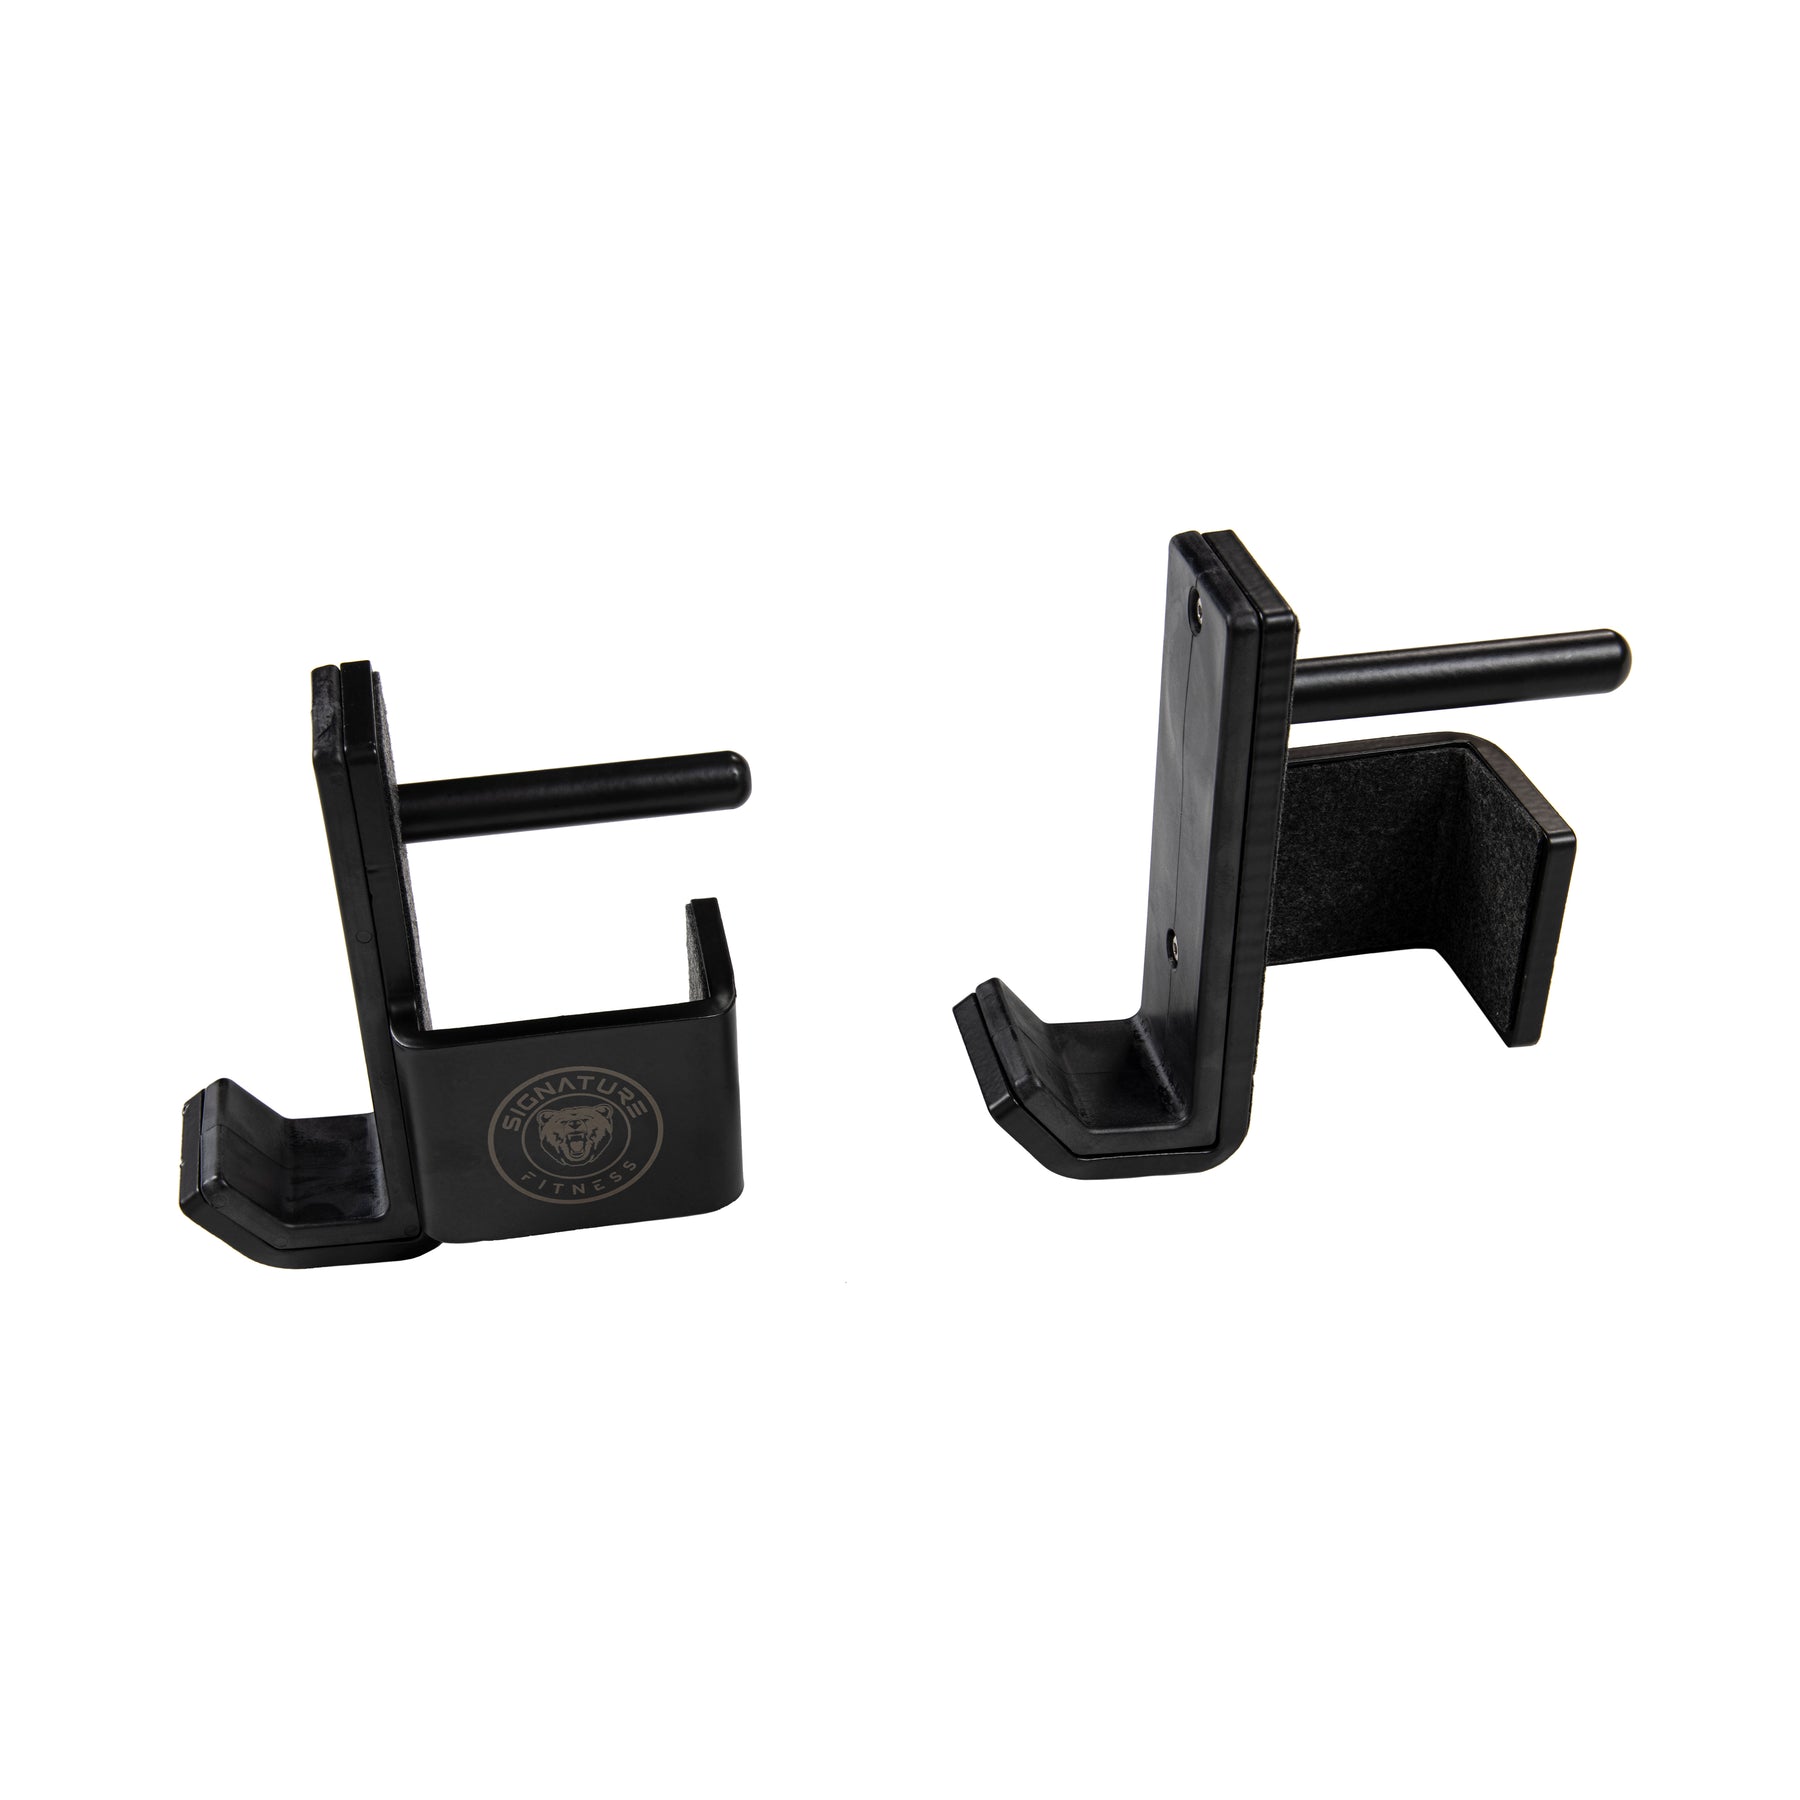 Signature Fitness J-Hooks with UHMW Plastic Coating to Protect Barbell